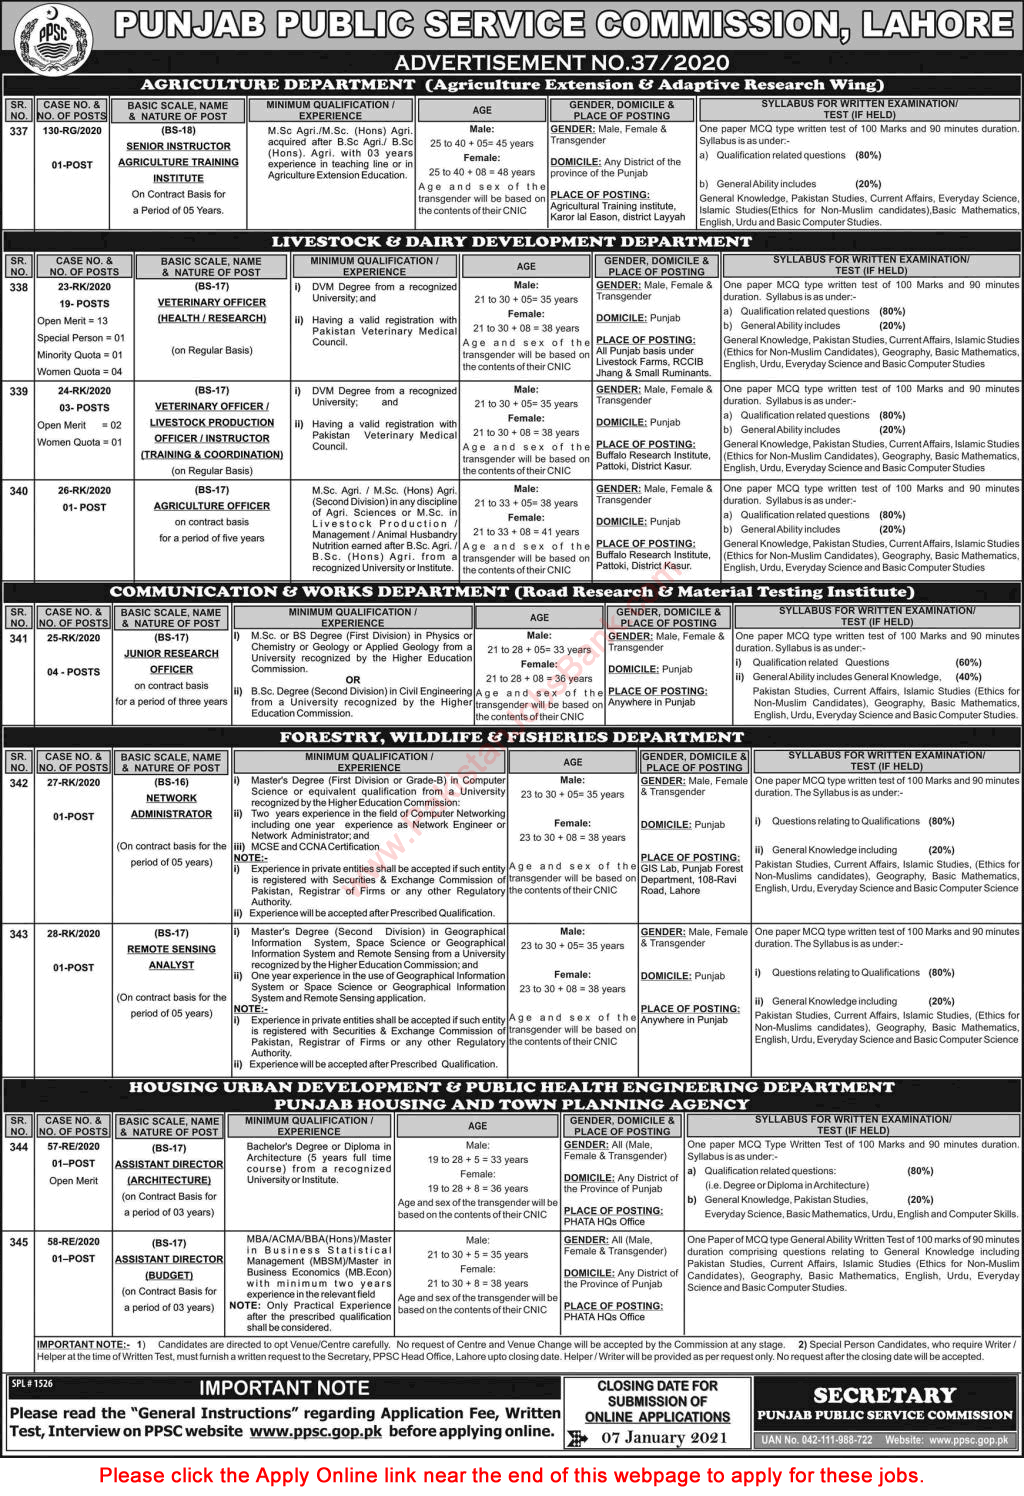 PPSC Jobs December 2020 Apply Online Consolidated Advertisement No 37/2020 Latest